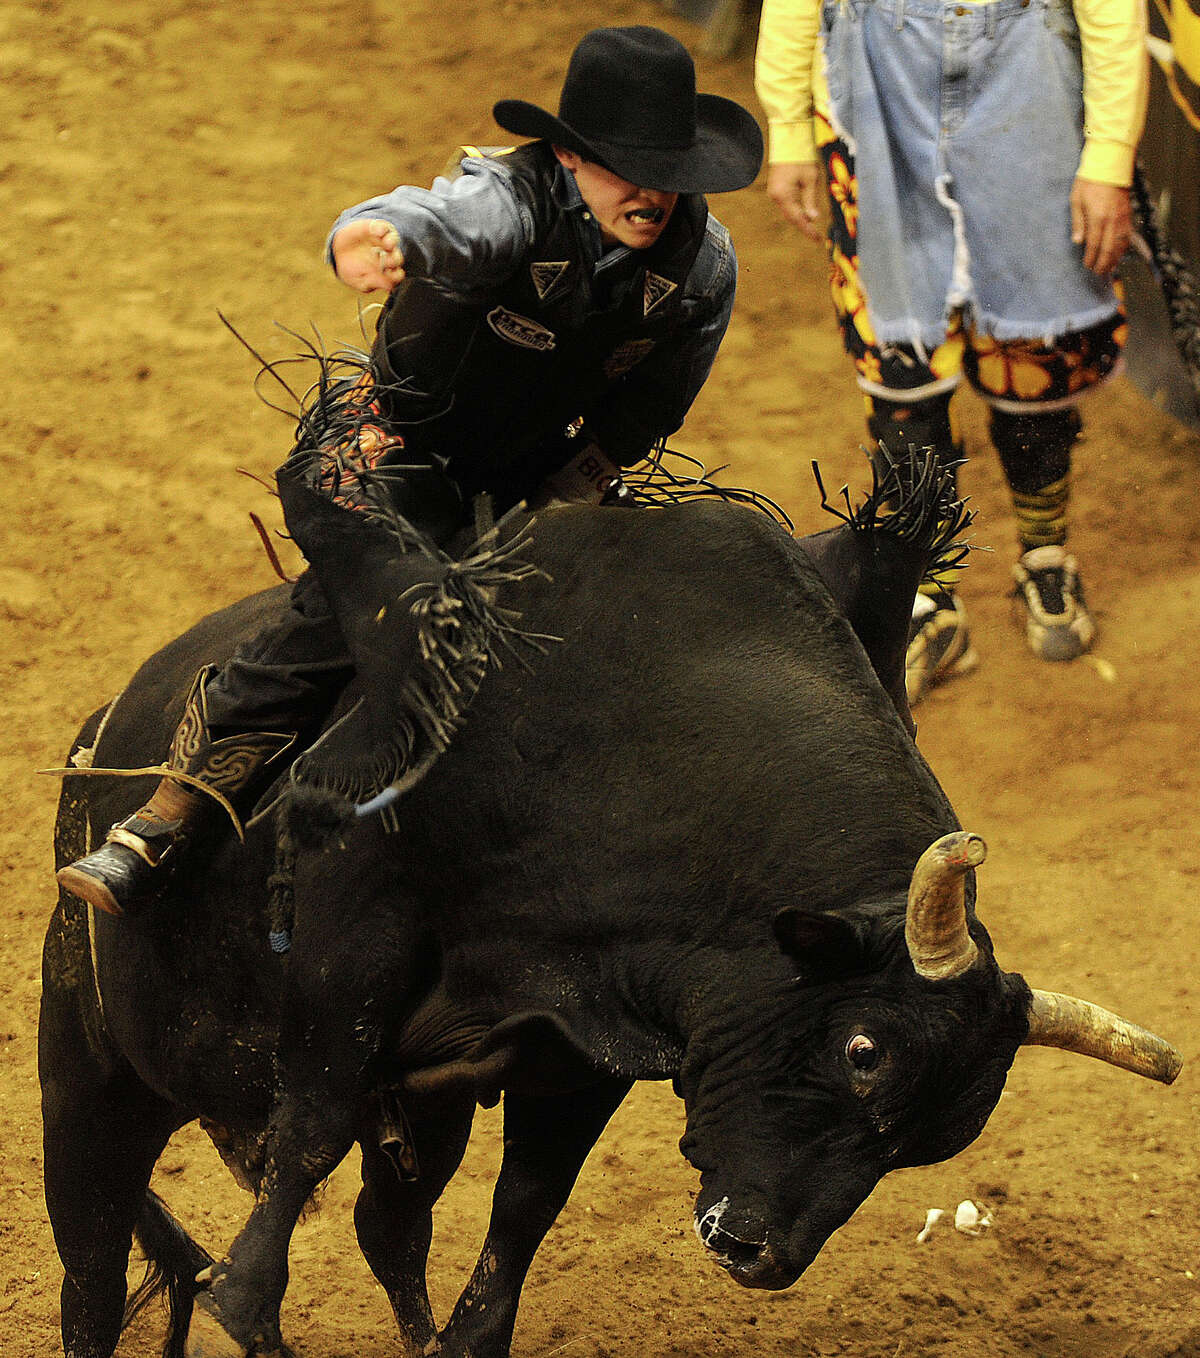 Jacob O'Mara from Prairieville, La., wins the bull riding competition by being the only cowboy stay on his bull for eight seconds during the matinee competition at the San Antonio Stock Show & Rodeo on Saturday, Feb. 12, 2011.